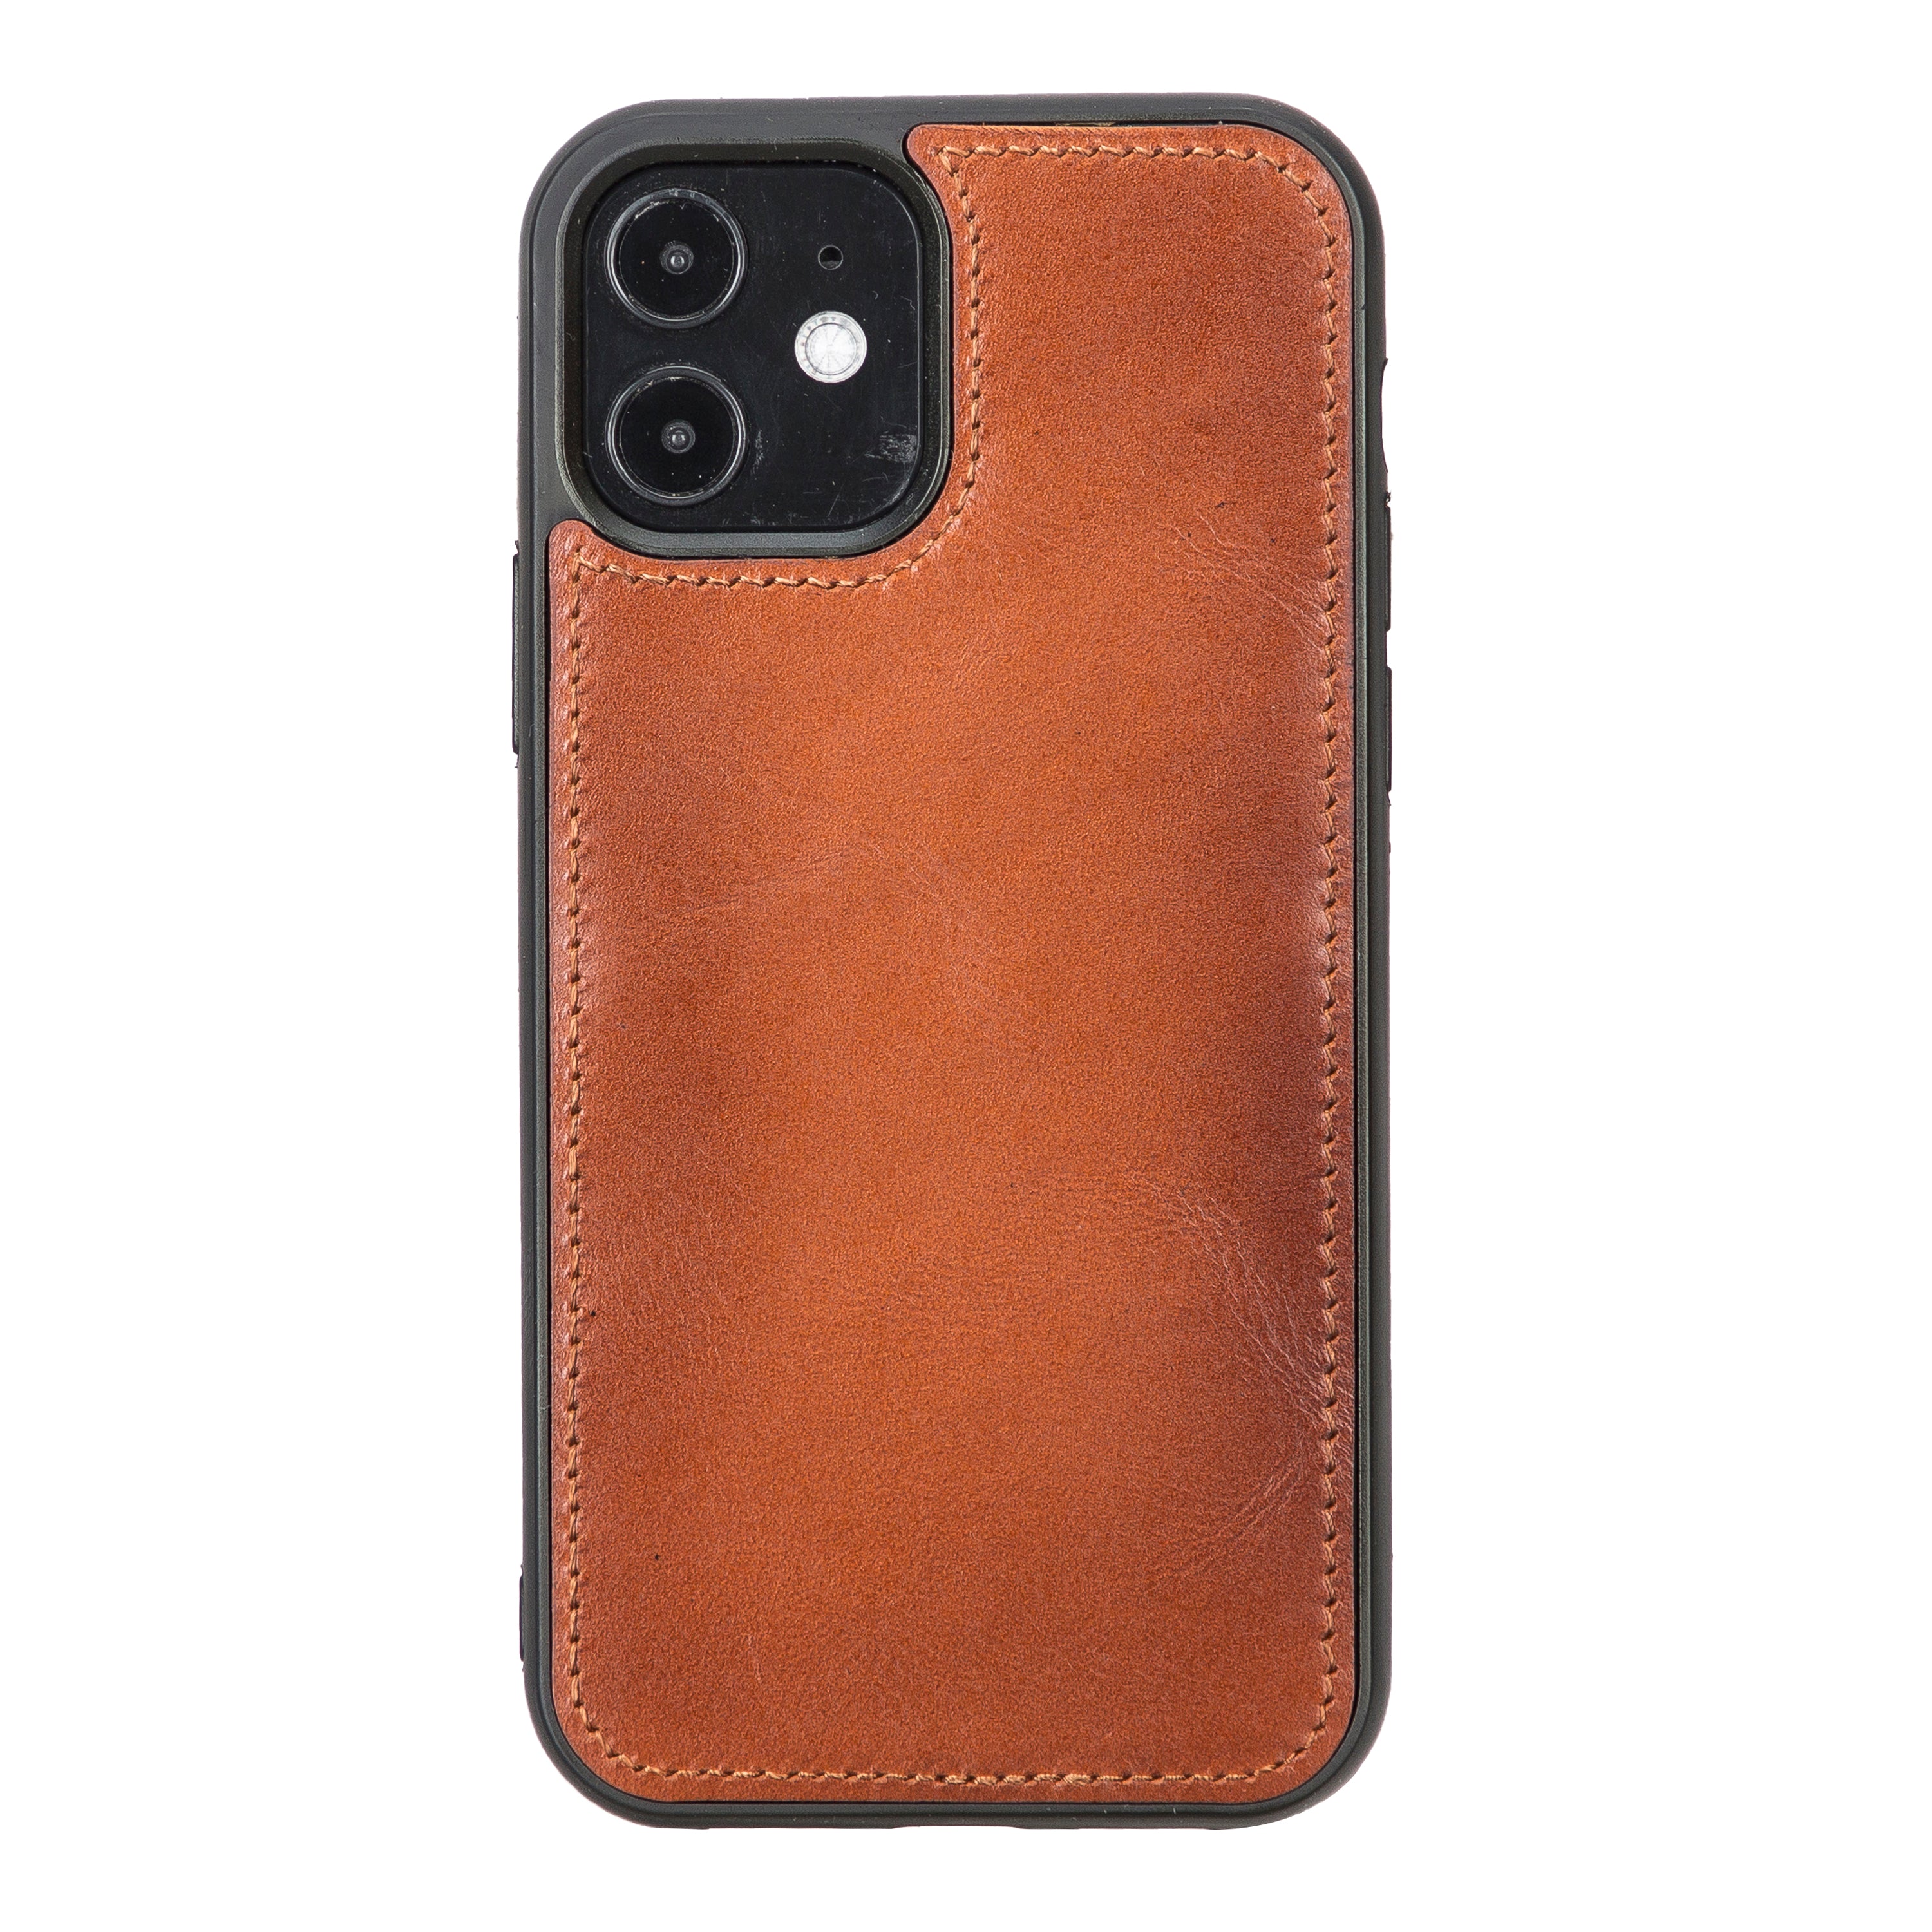 DelfiCase Magnetic Detachable Leather Wallet Case for iPhone 12 and iPhone 12 Pro (6.1") 5